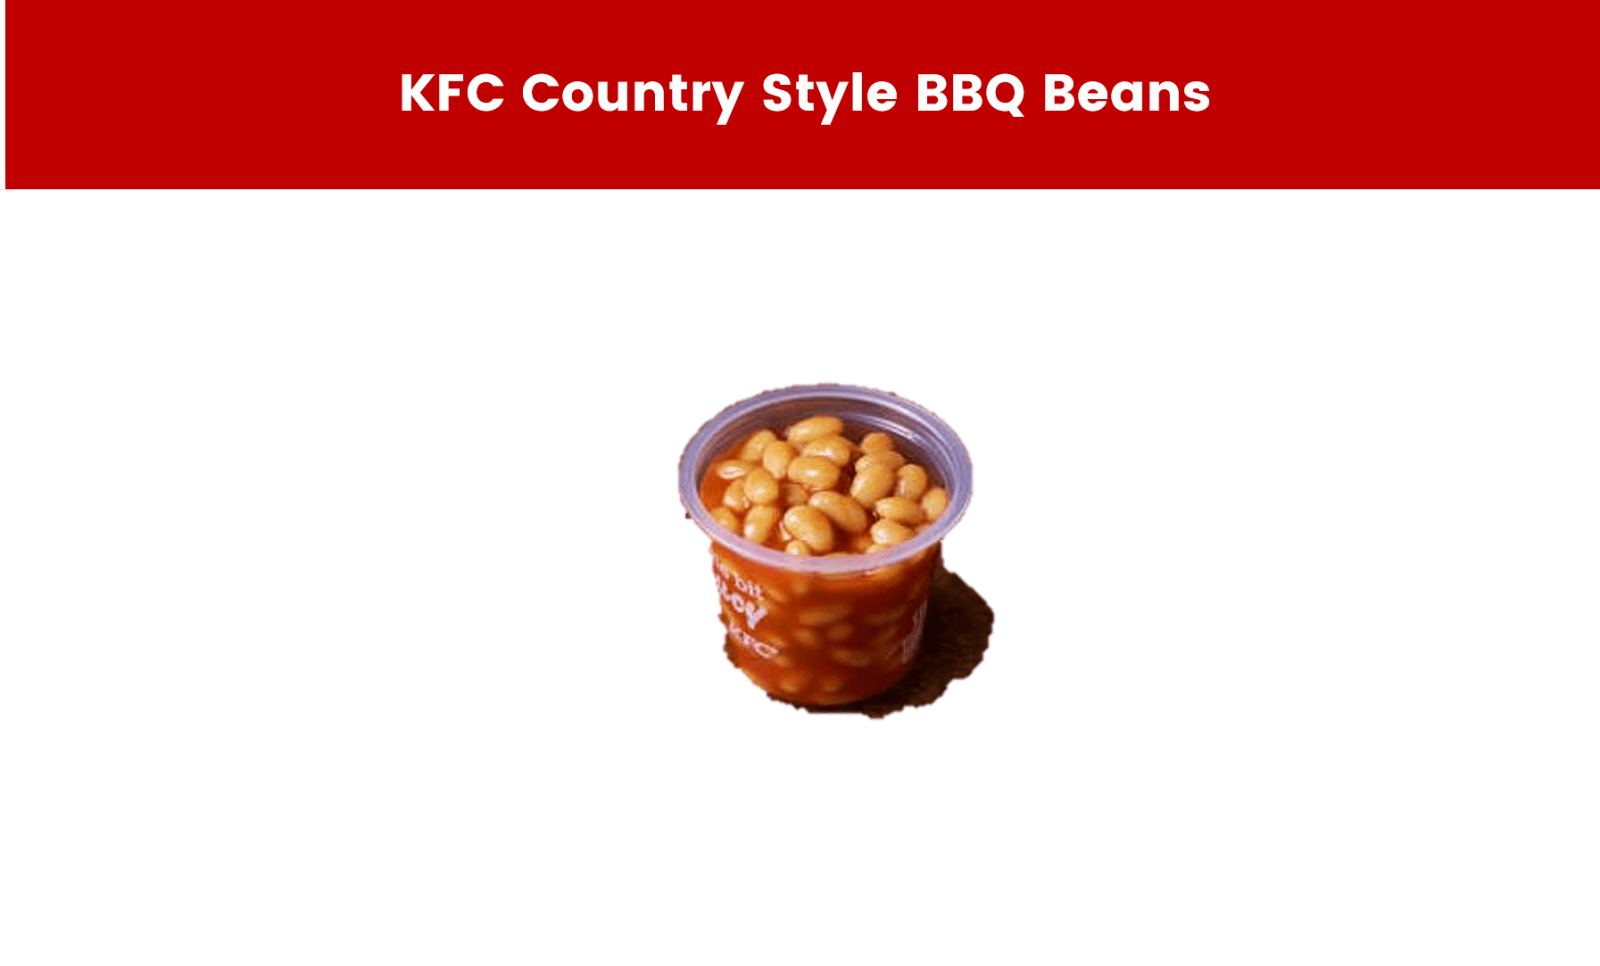 KFC Country Style BBQ Beans
